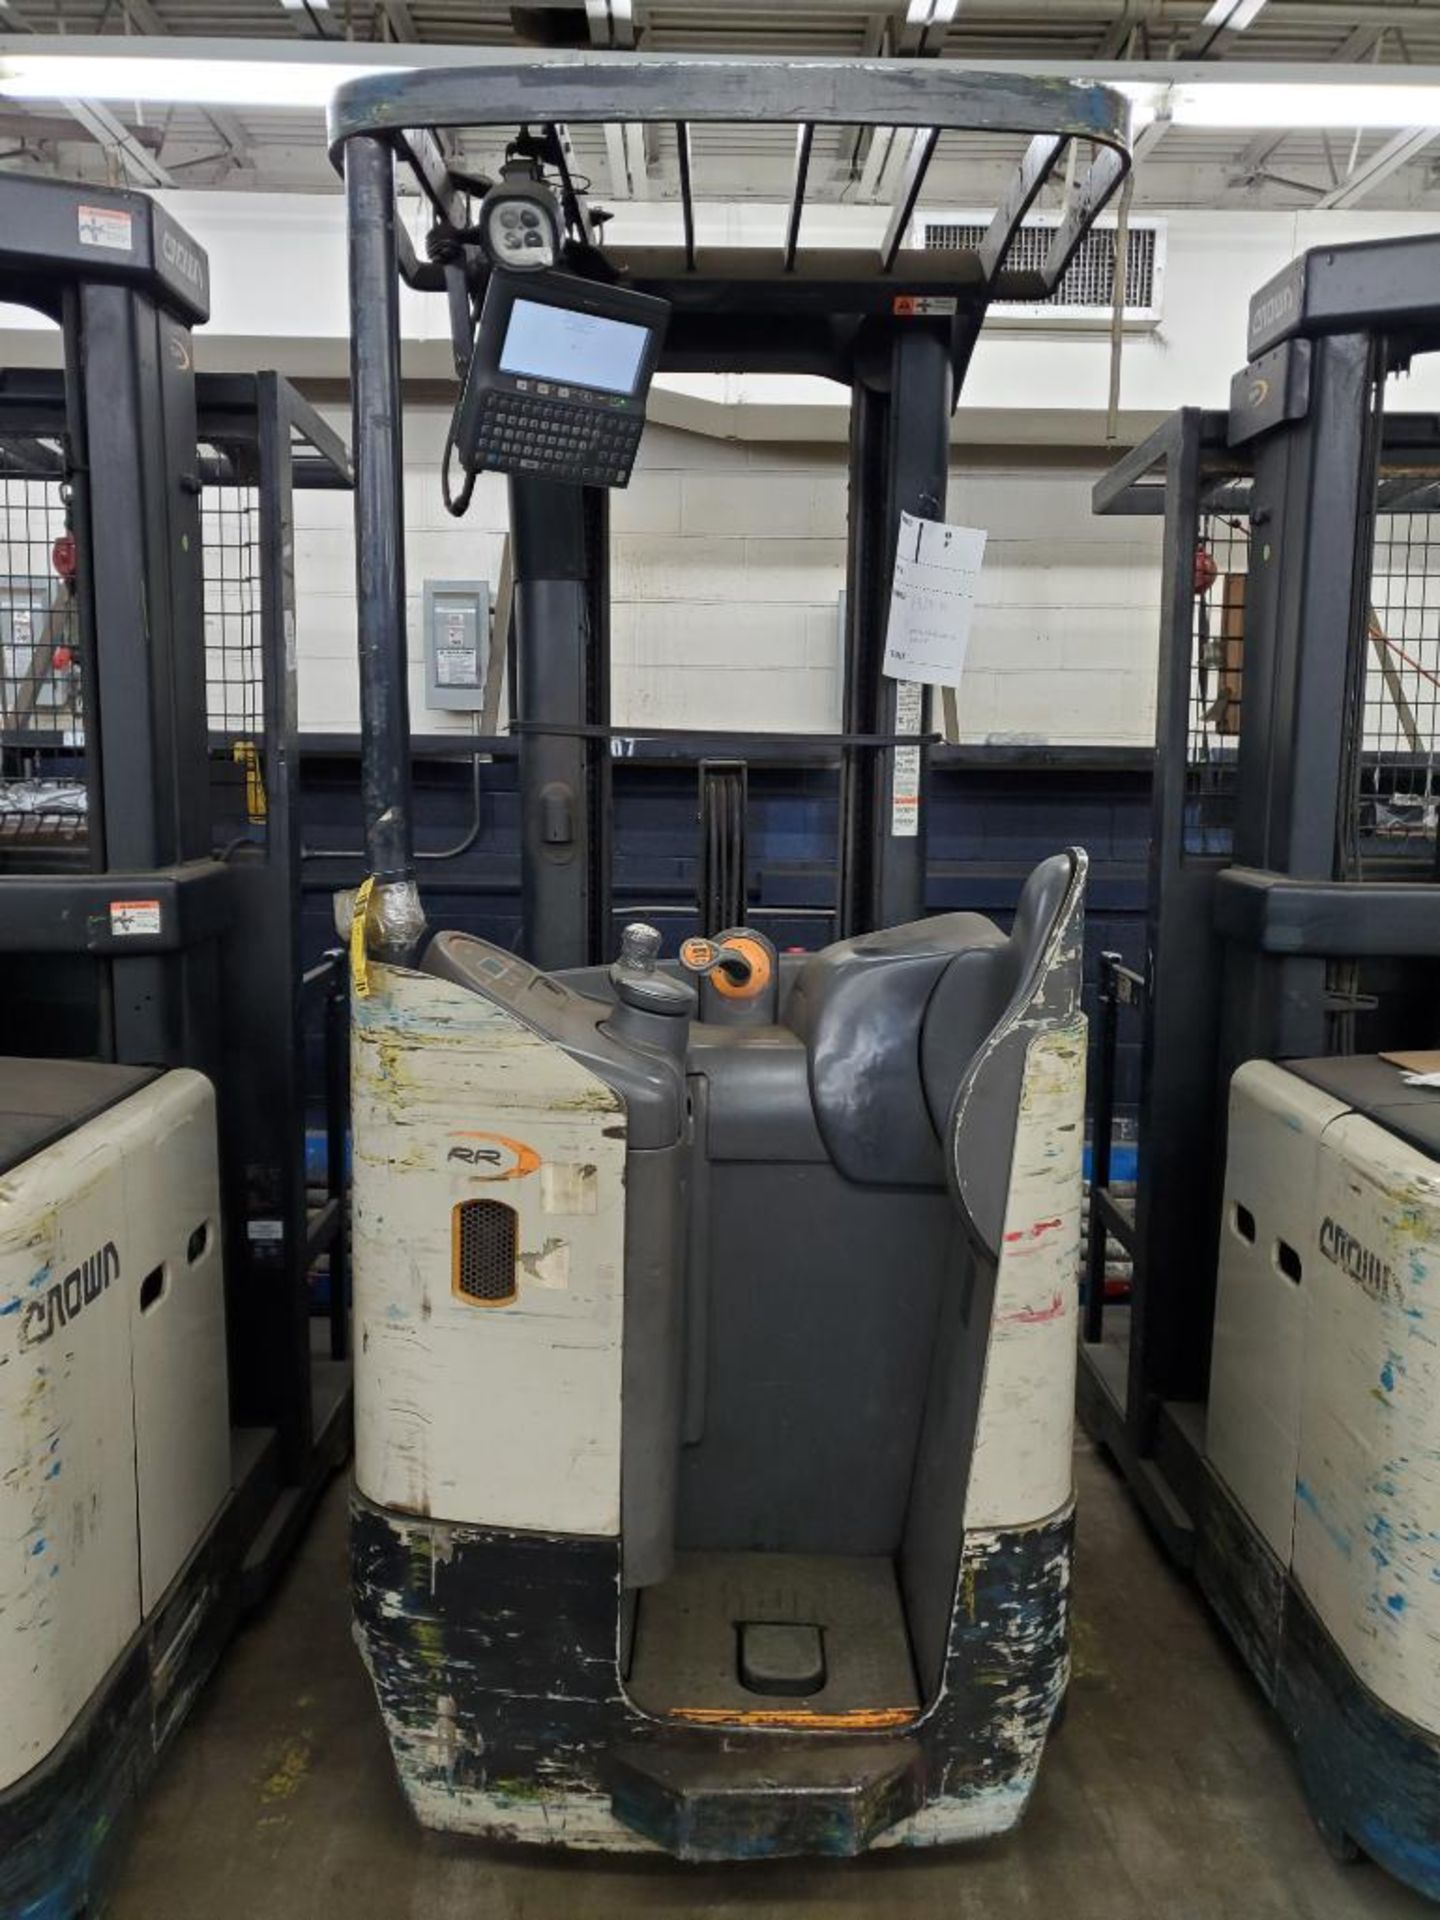 2014 Crown RR 5700 Series Electric Reach Truck, Model RR5725-45, S/N 1A415849, 4,500 LB. Lift Capaci - Image 2 of 7